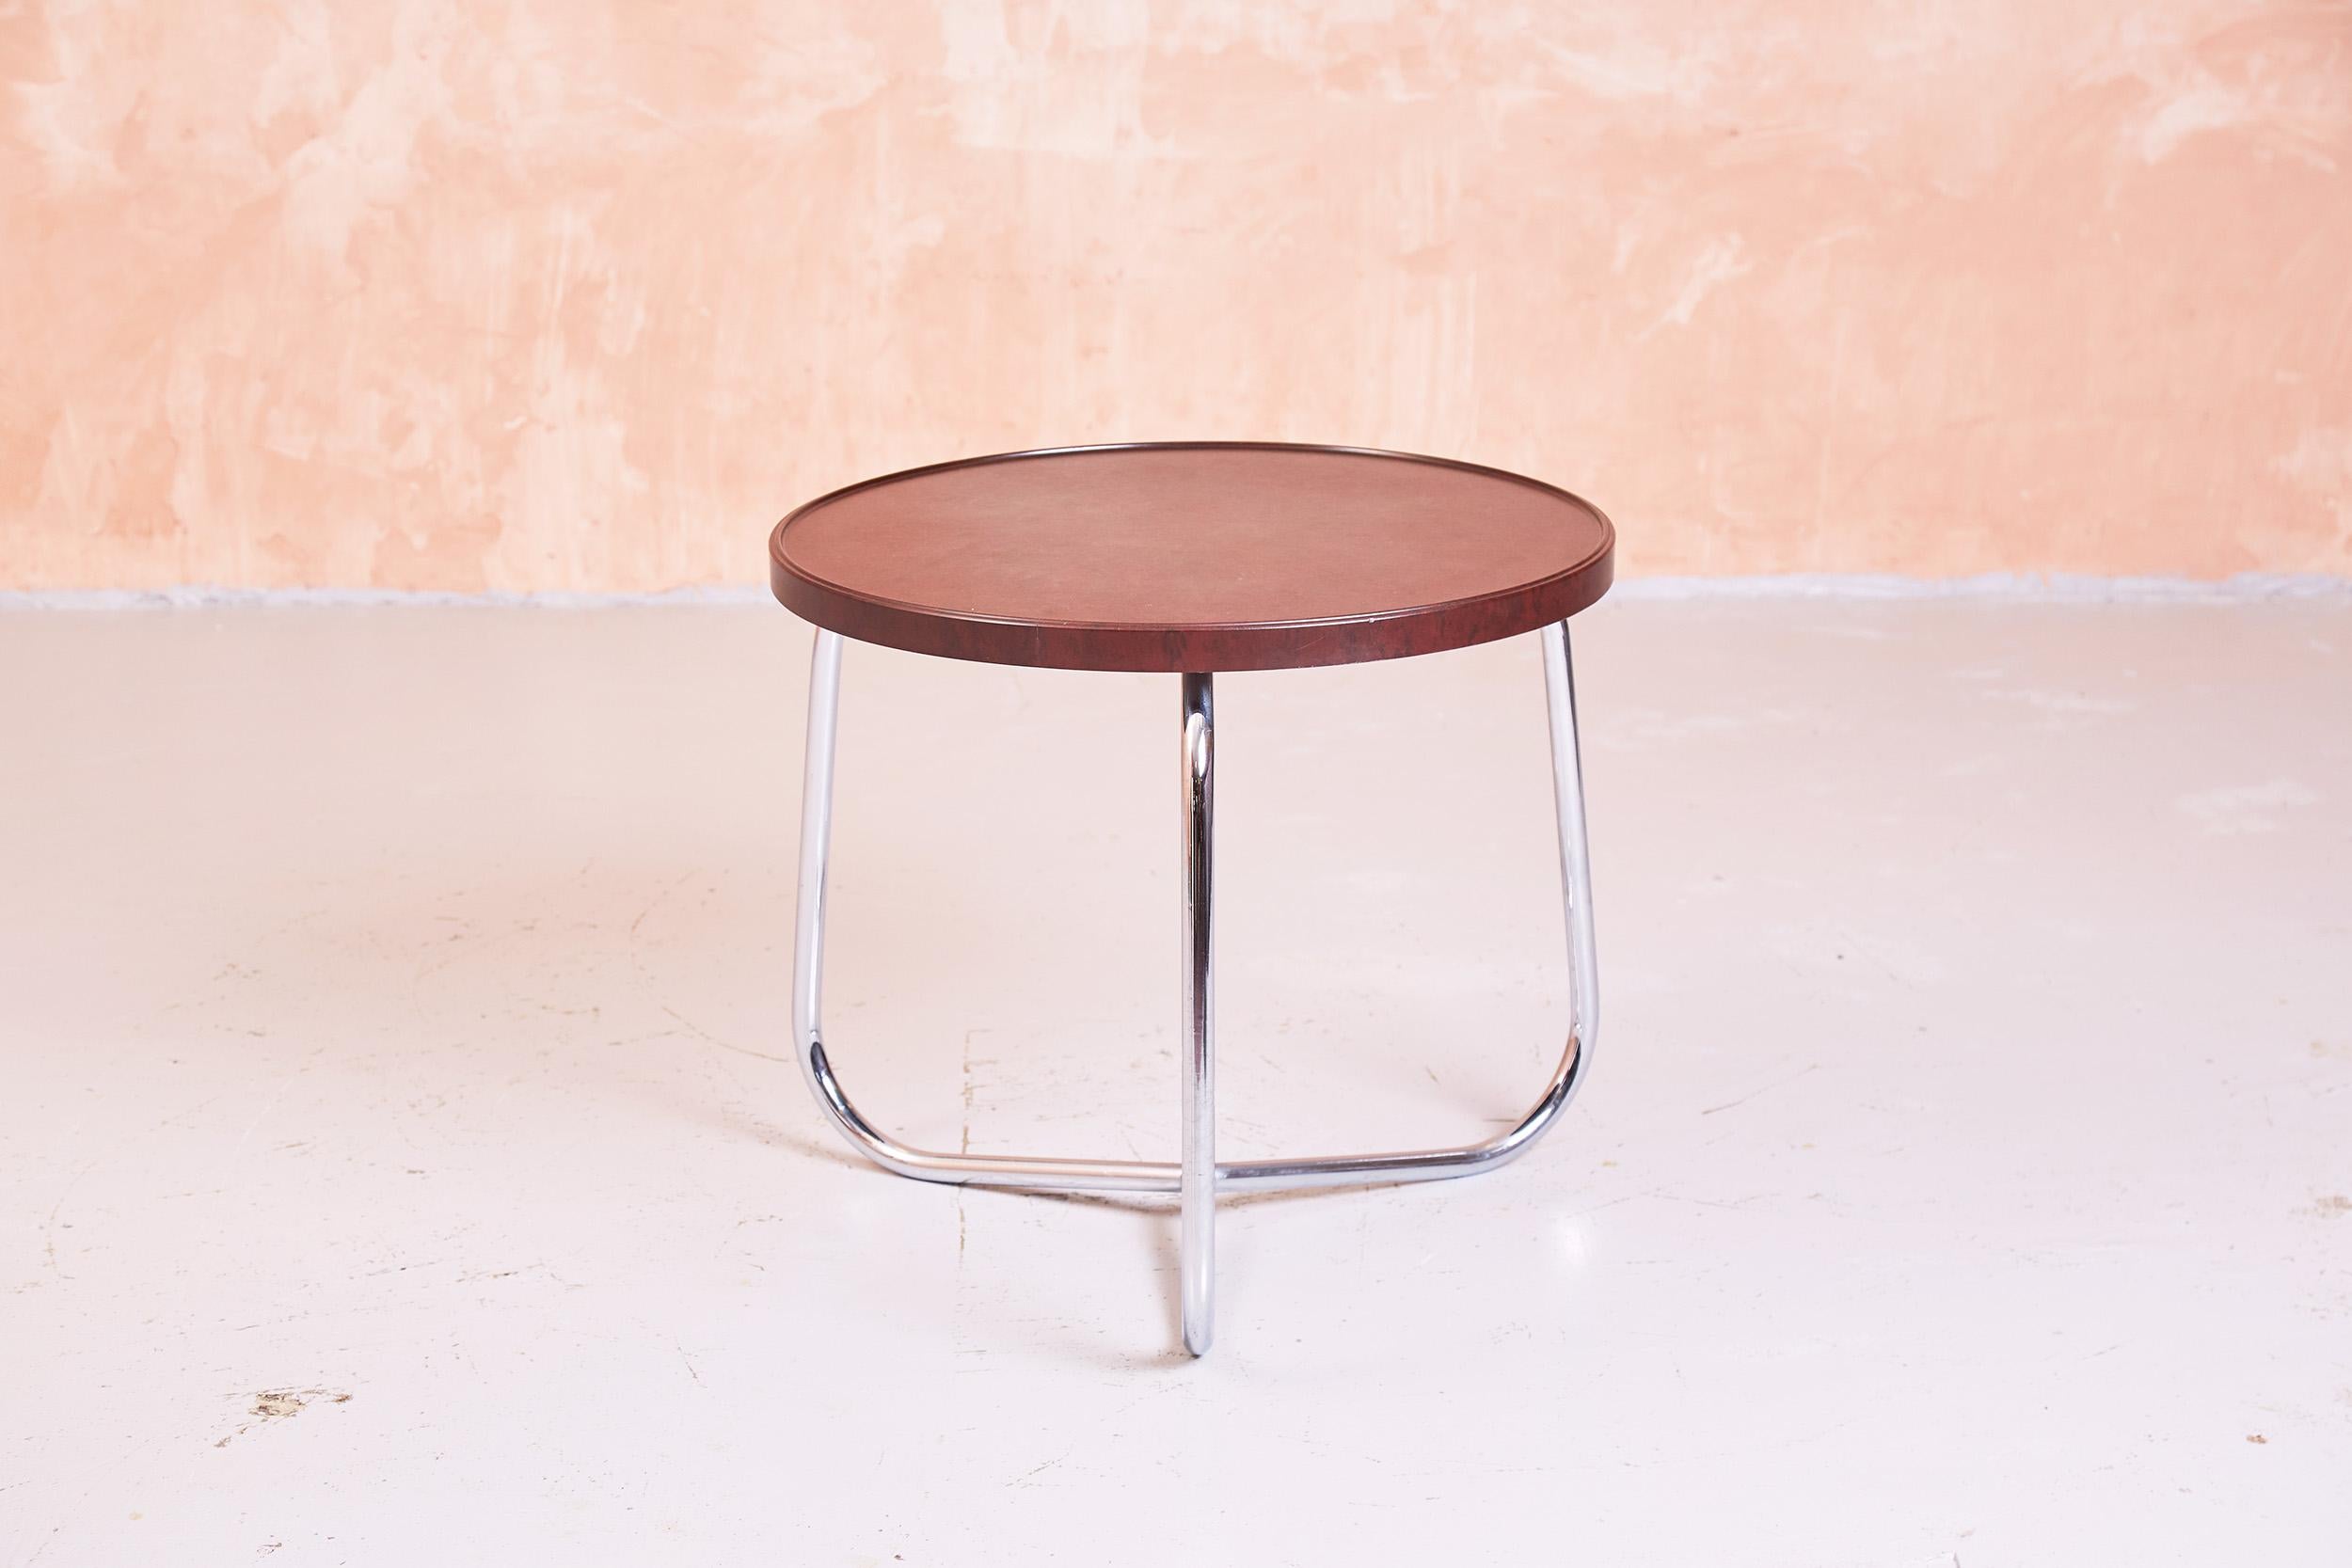 British bakelite topped side table with chrome steel base.
Produced in the 1940s, this modernist design was manufactured by Airborne Furniture.
 